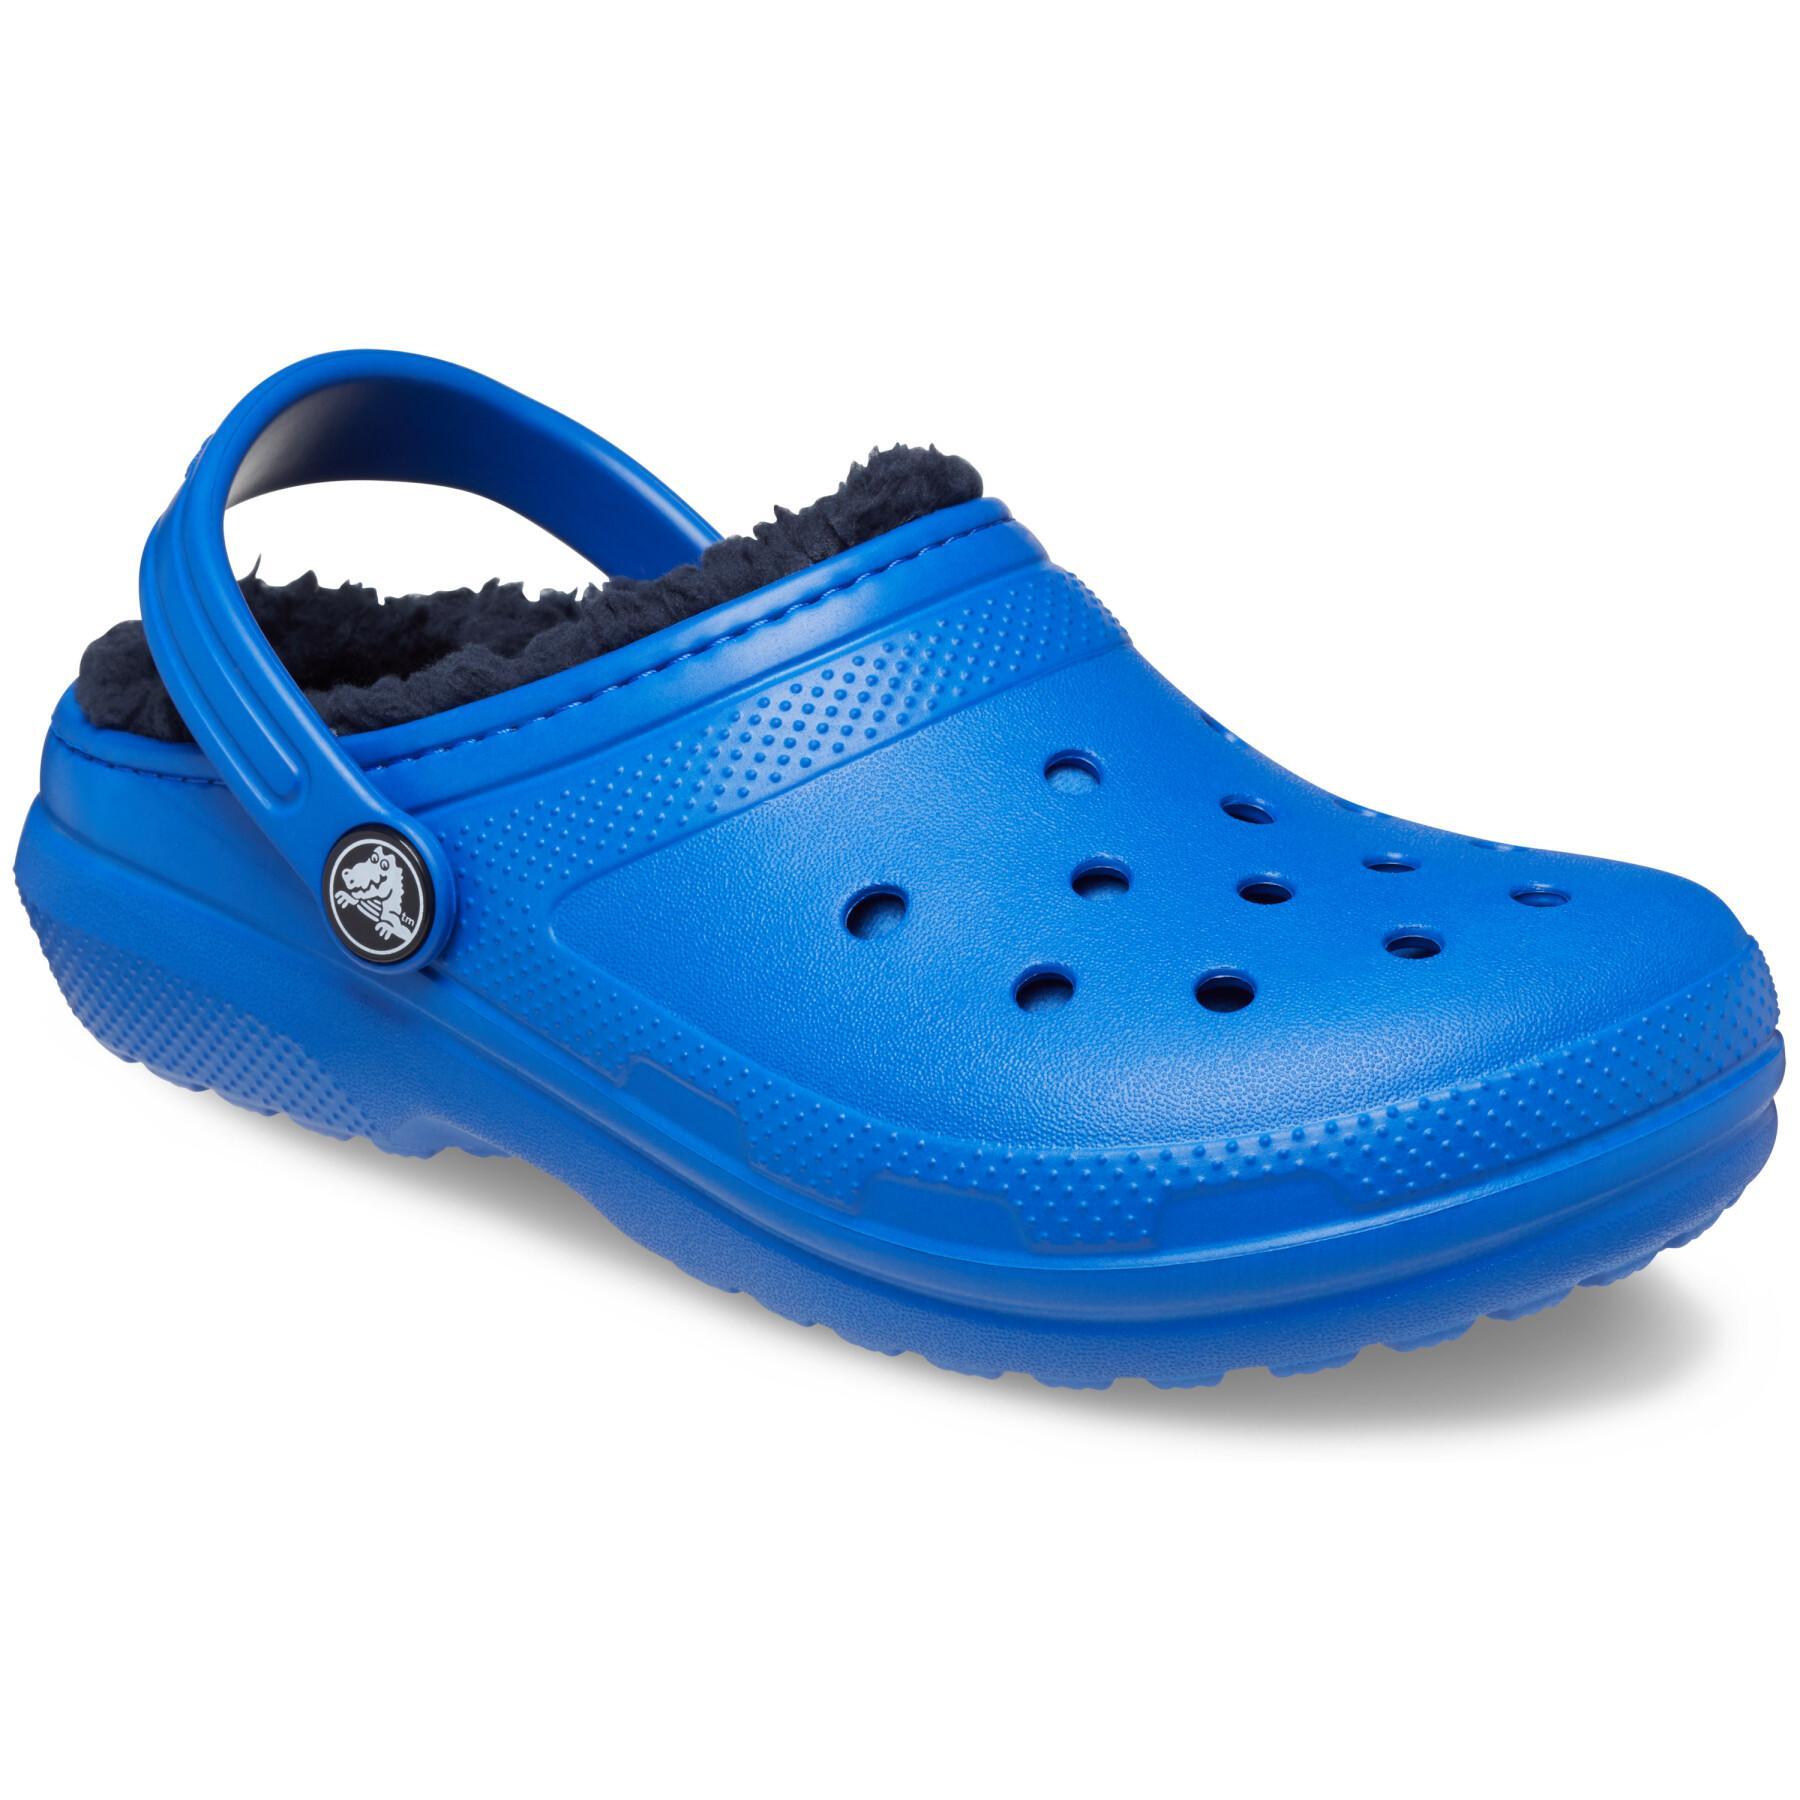 Baby klompen Crocs Classic Lined